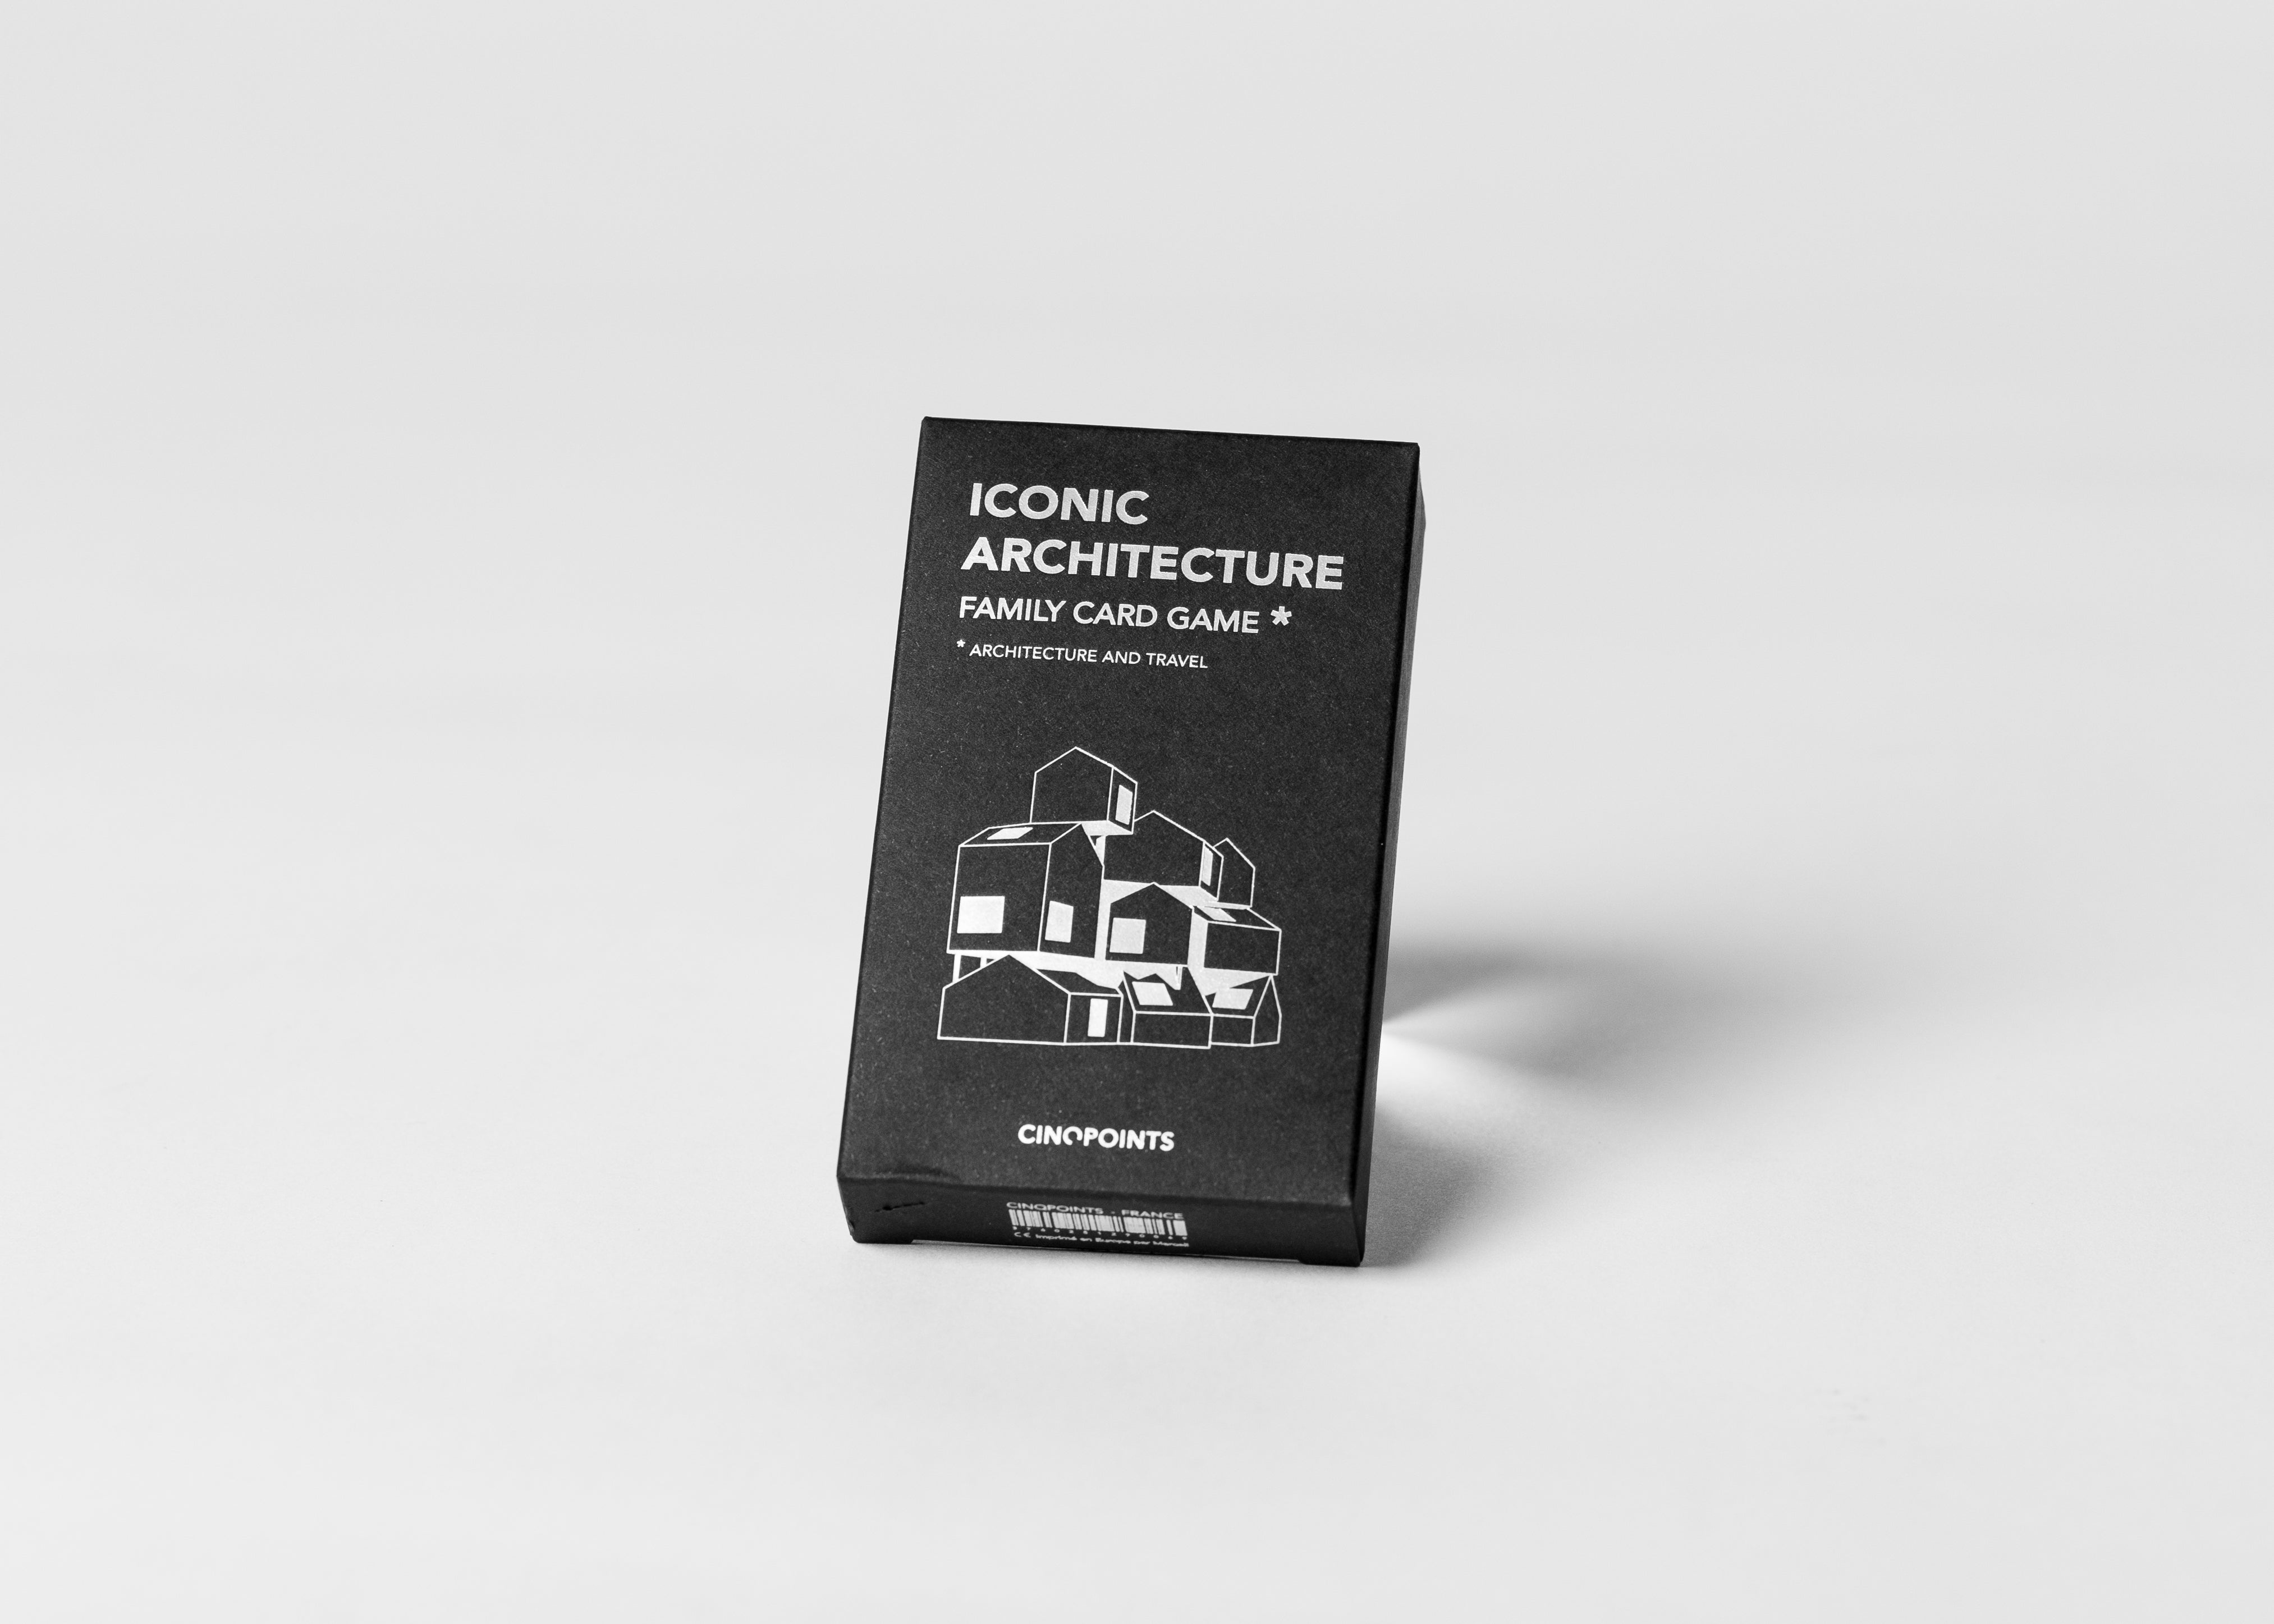 Iconic Architecture Card Game